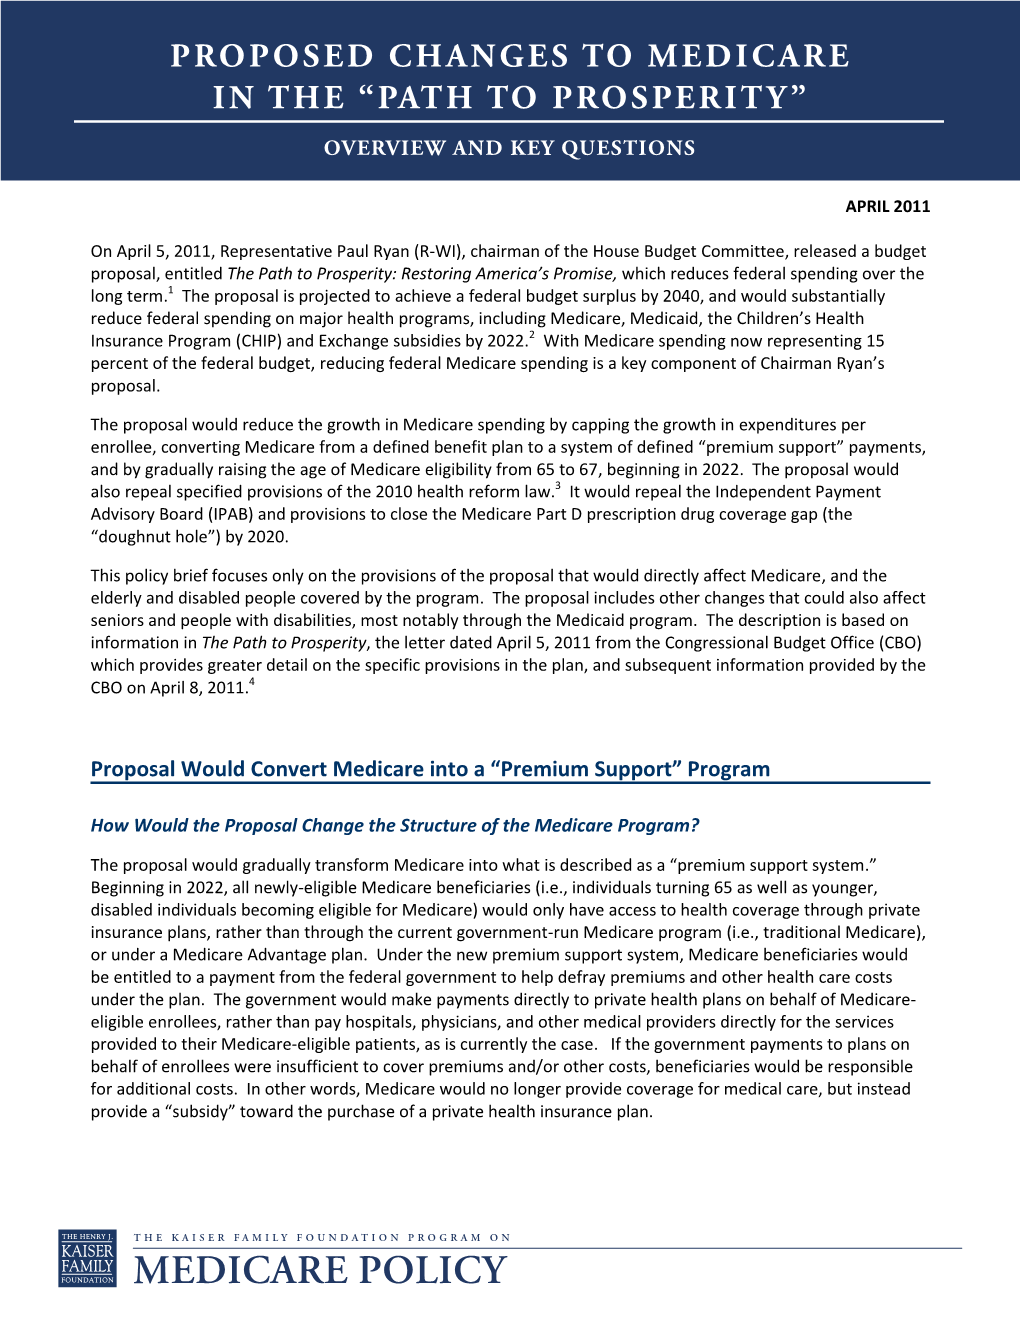 Proposed Changes to Medicare in the “Path to Prosperity” How Would the Federal Premium Support Payment Increase Each Year?